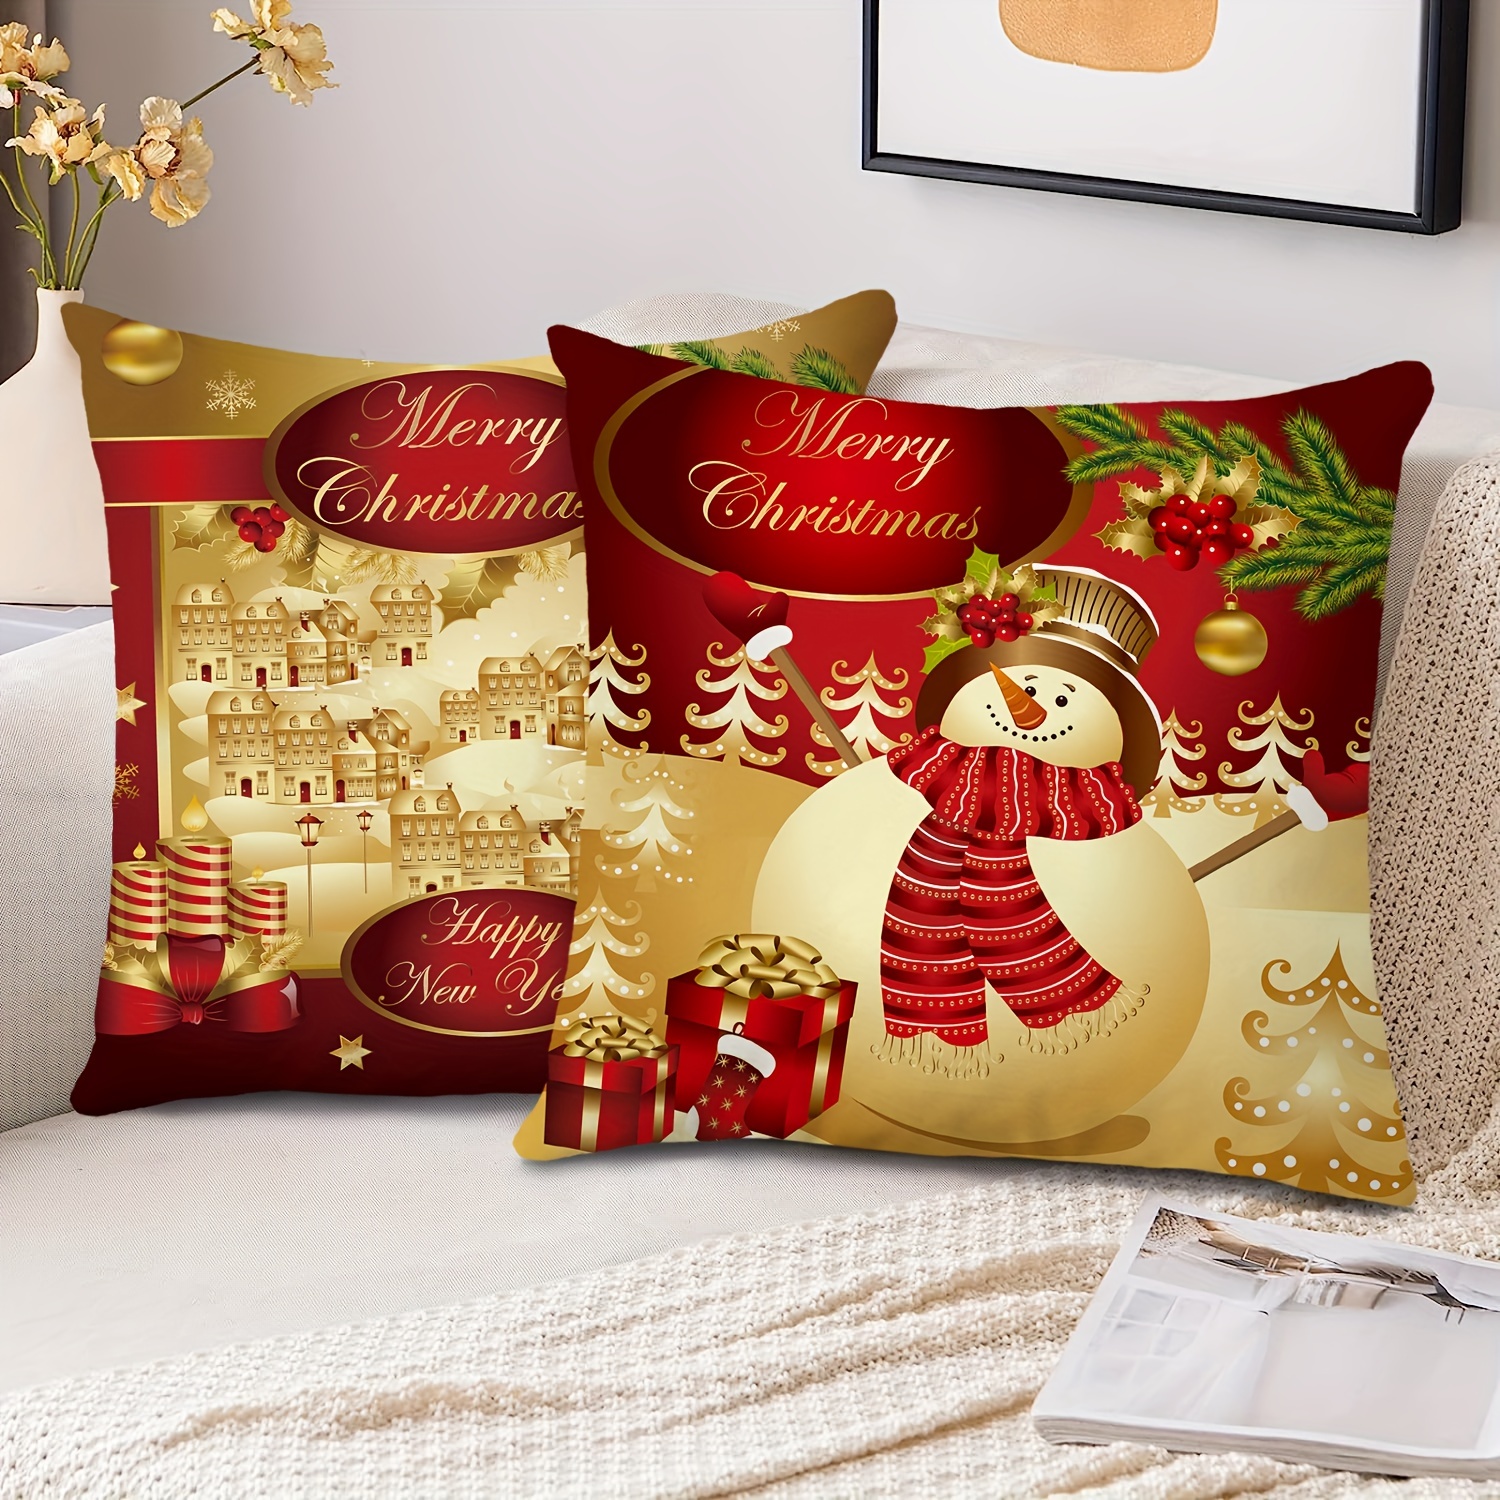  Lewondr Christmas Pillow Cover Set of 2 Merry Christmas  Nutcracker Throw Pillow Cover 18 x 18 Inch Embroidery Cartoon Home Decor  Square Cushion Case for Winter Holiday Party Xmas Sofa Bed